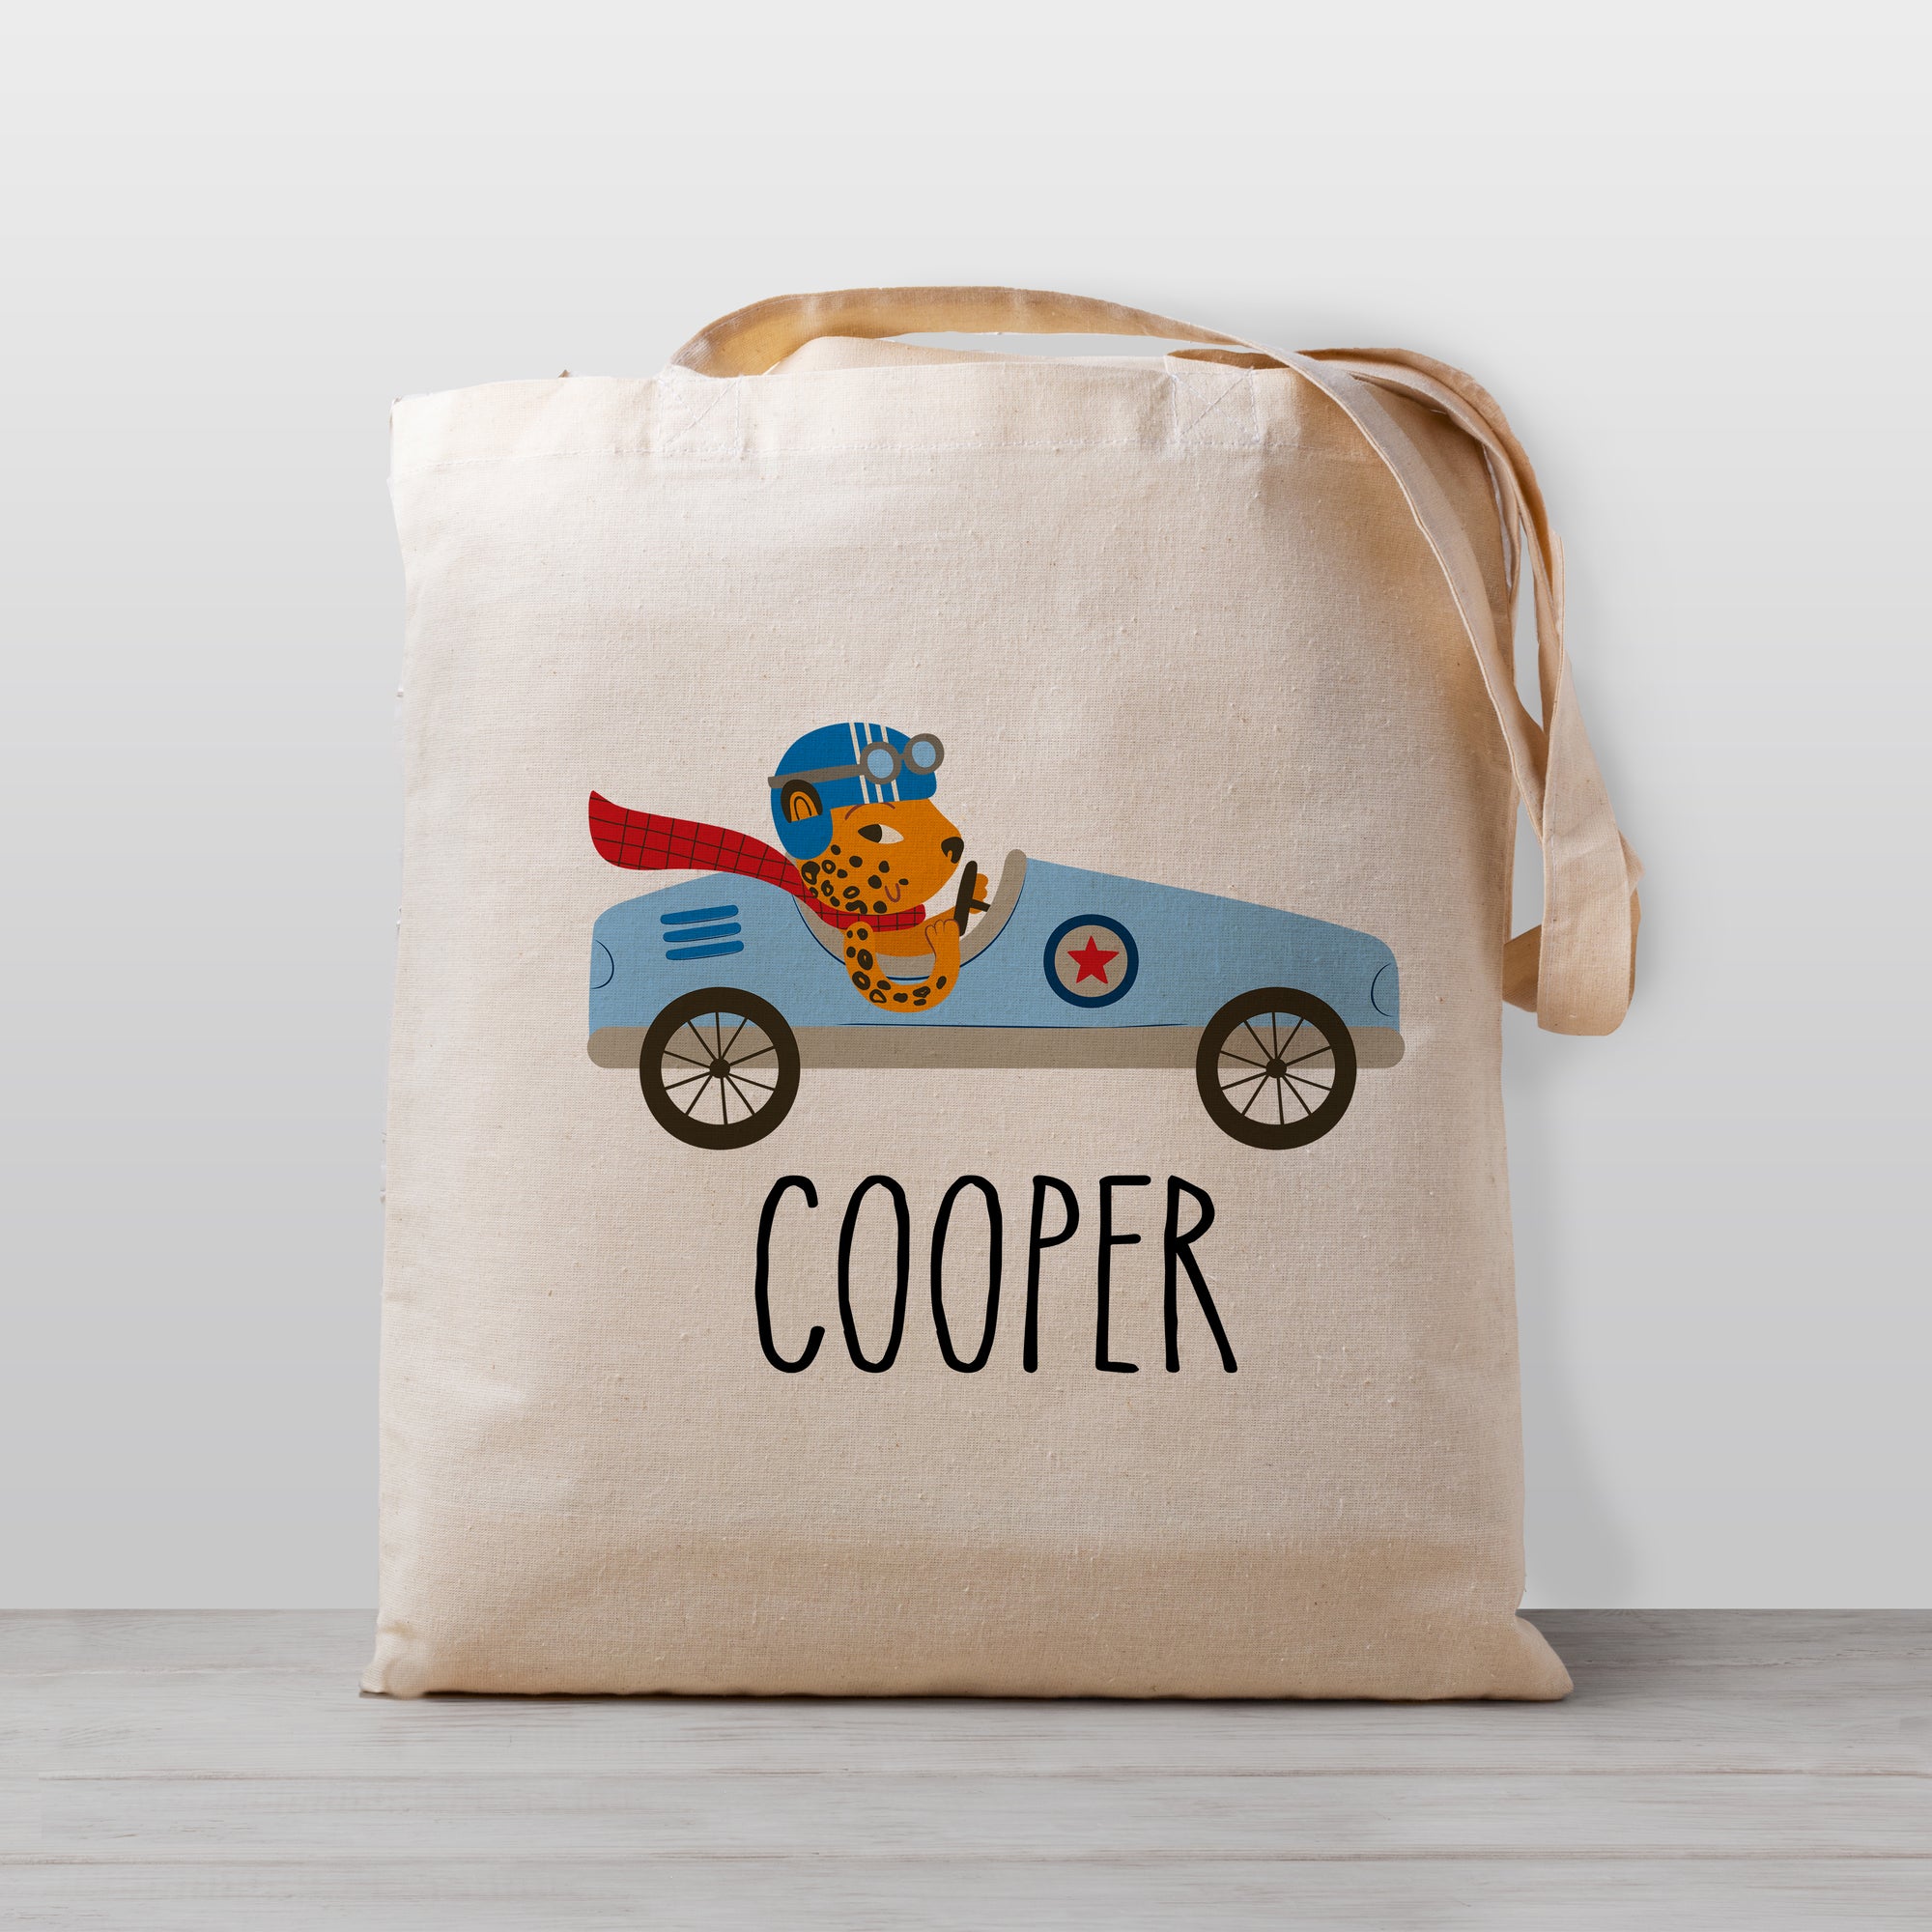 Race Car Personalized tote bag, featuring a light blue race car driven by a cheetah, 100% natural cotton canvas bag - great for daycare, preschool, or toys